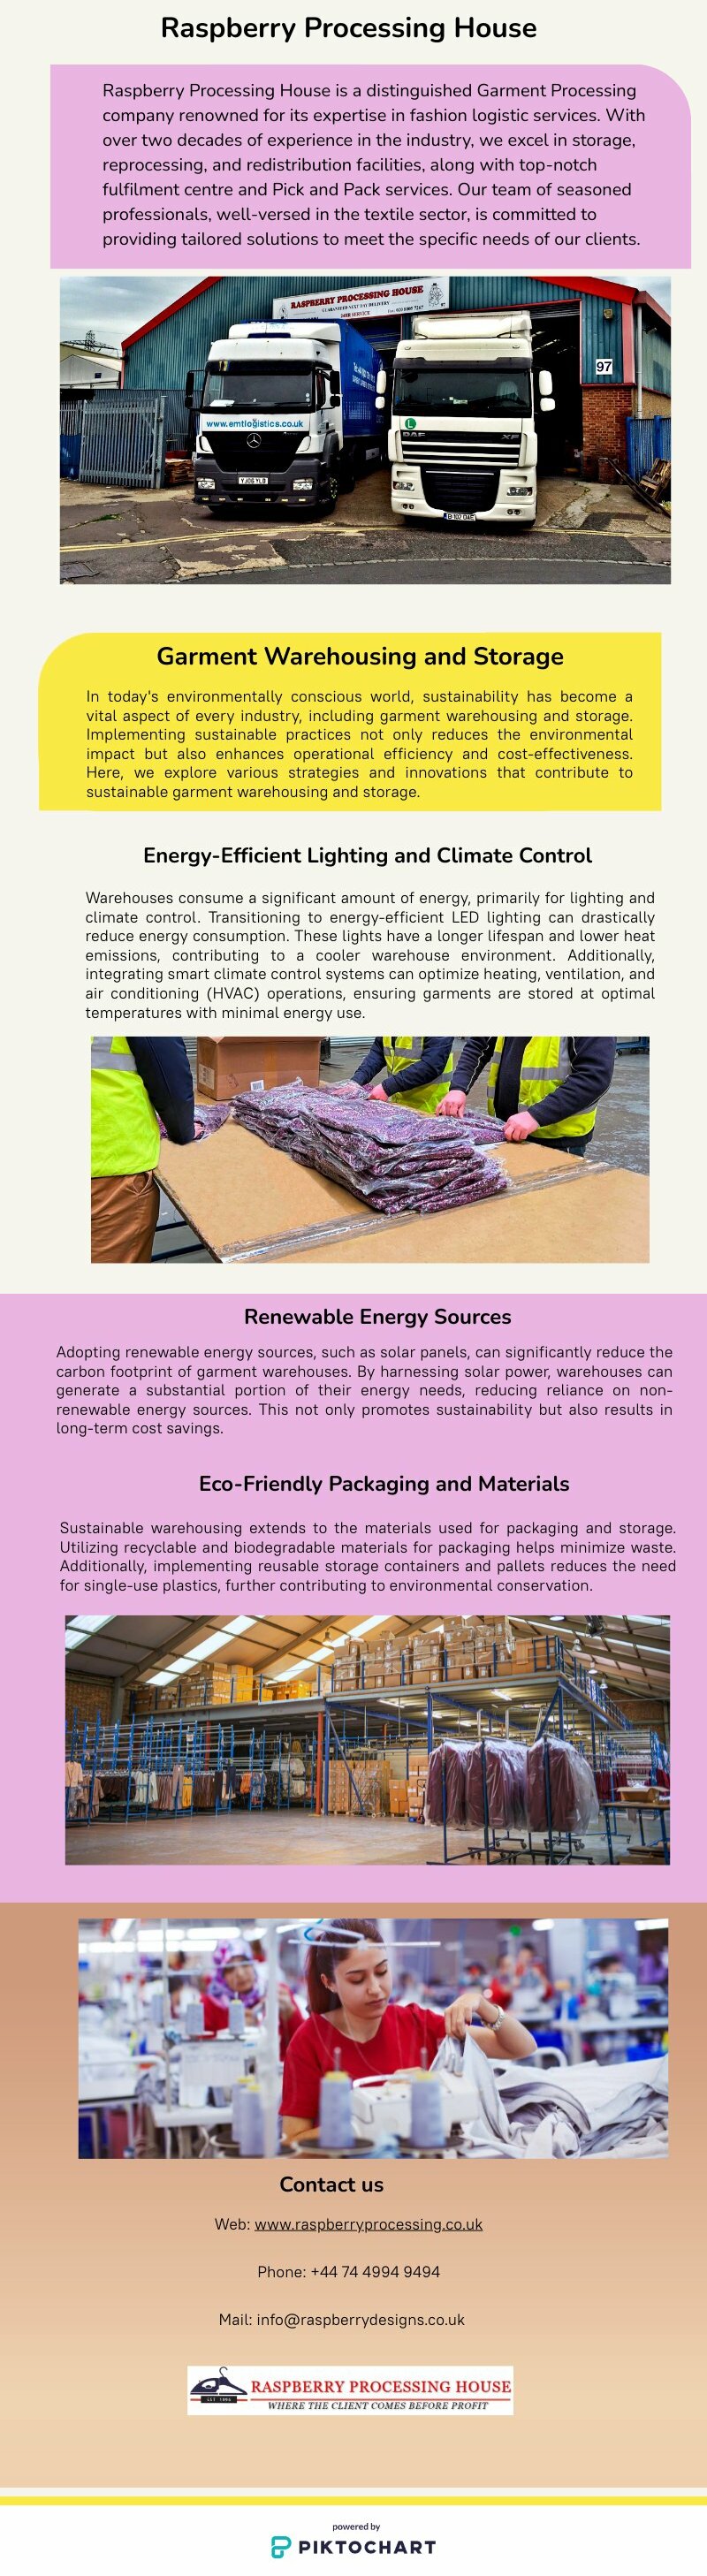 Sustainable Practices in Garment Warehousing and Storage | Piktochart Visual Editor